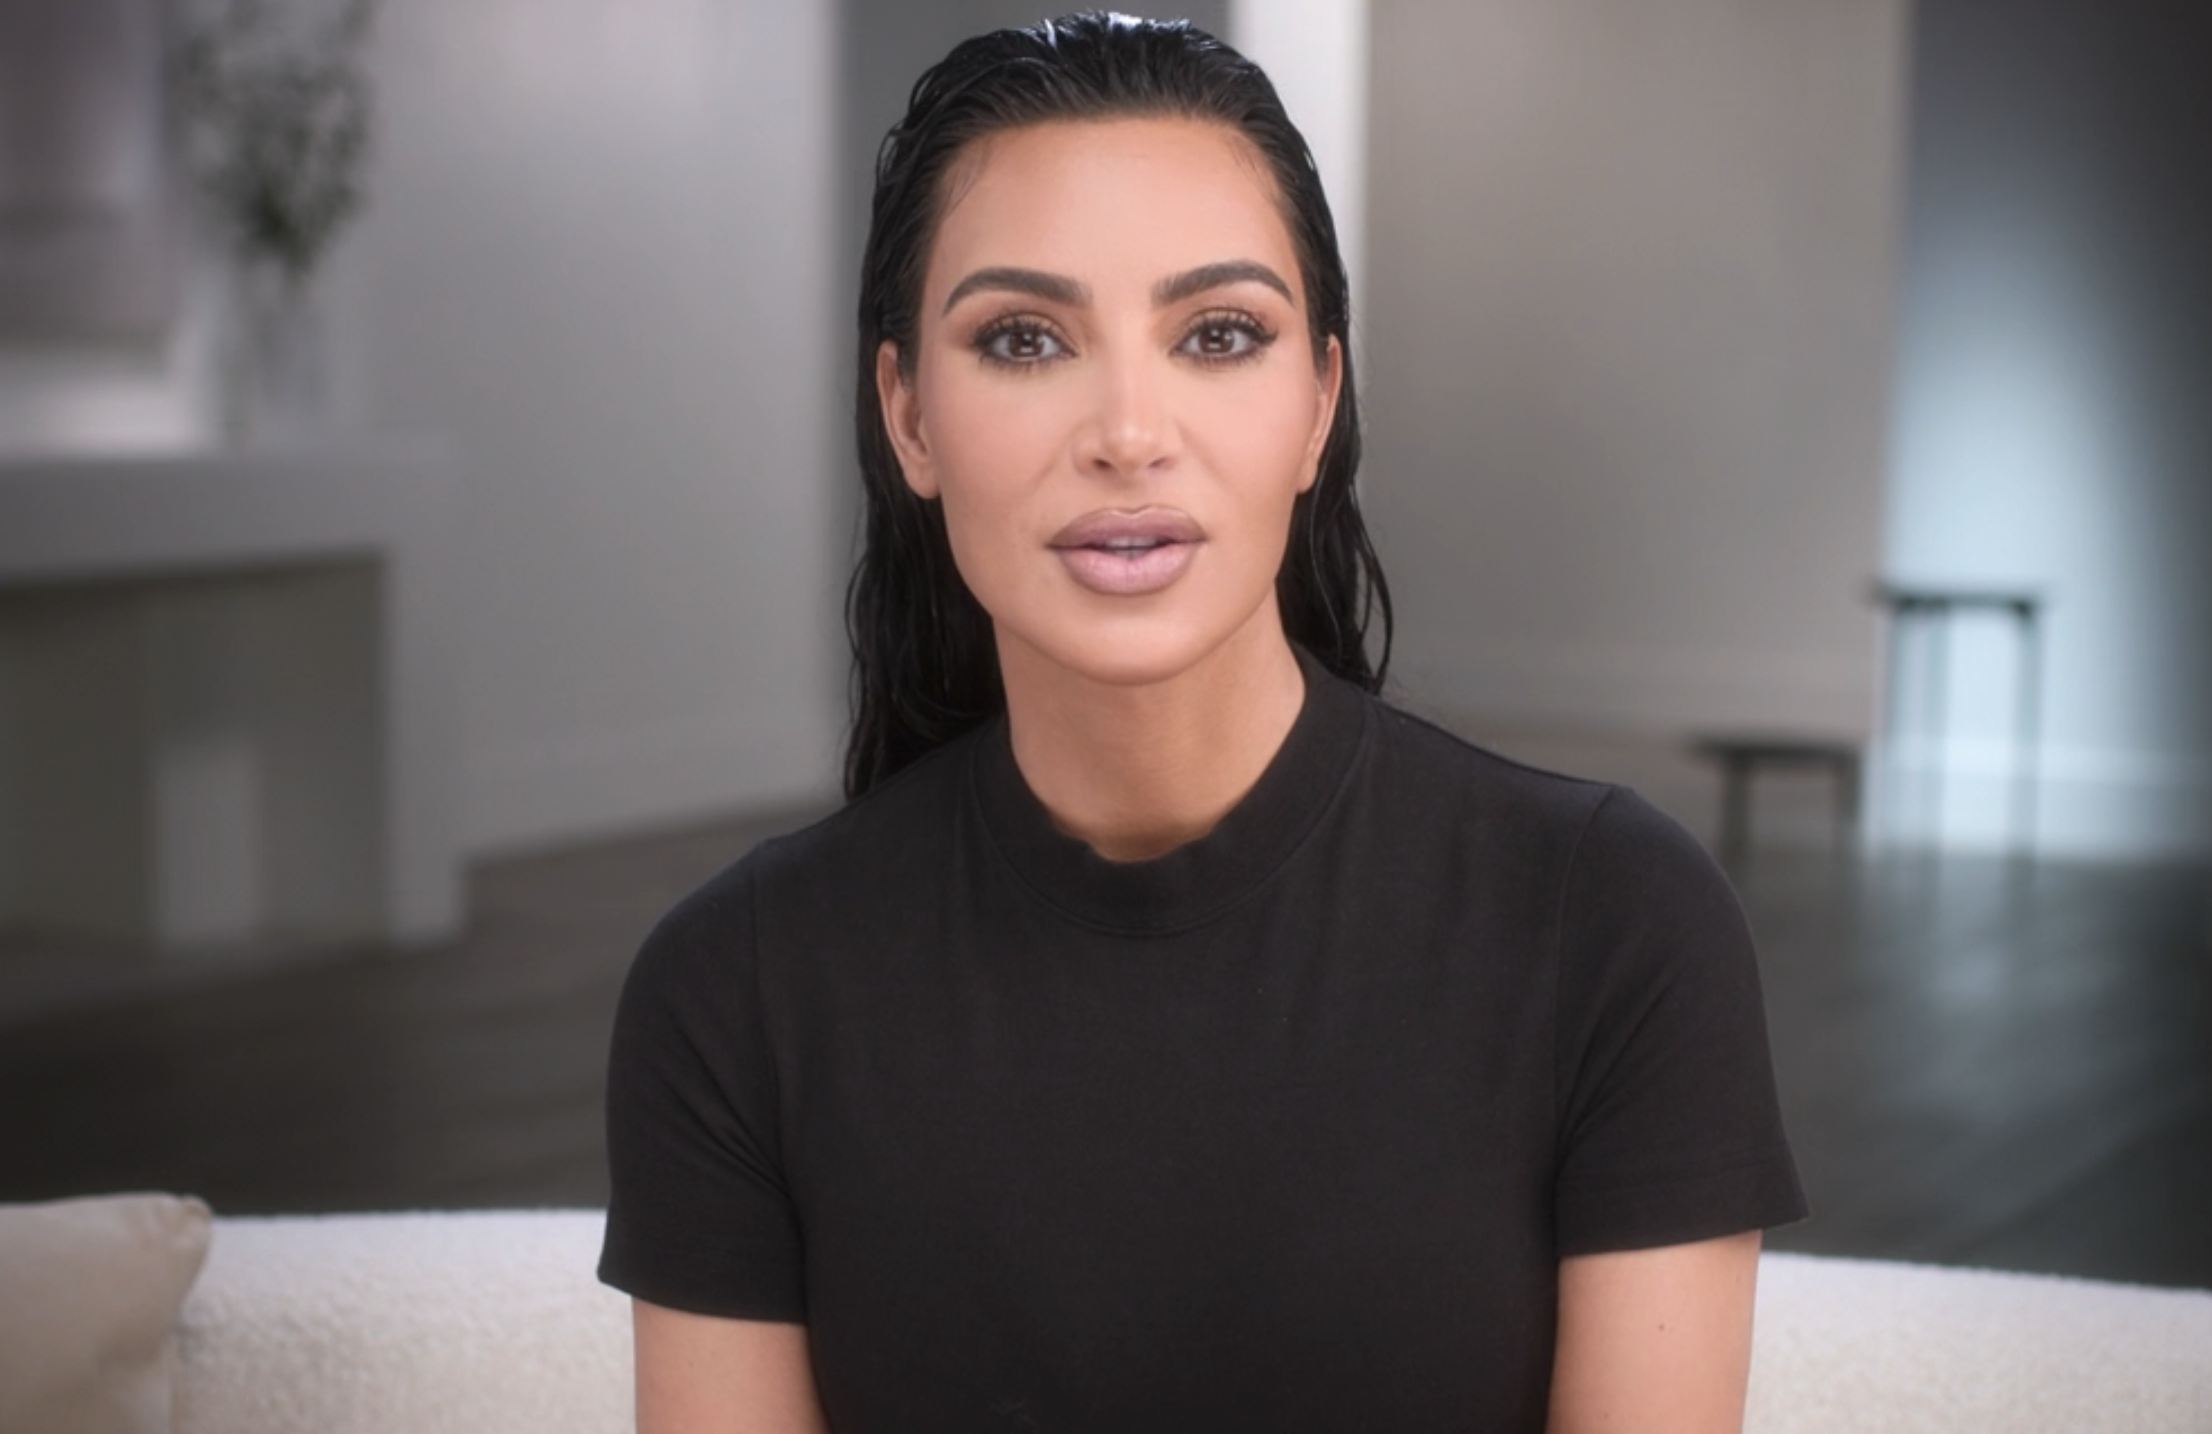 Kim Kardashian, with wet hair and wearing a simple shirt, sits on a light-colored couch in a modern, minimalistic room